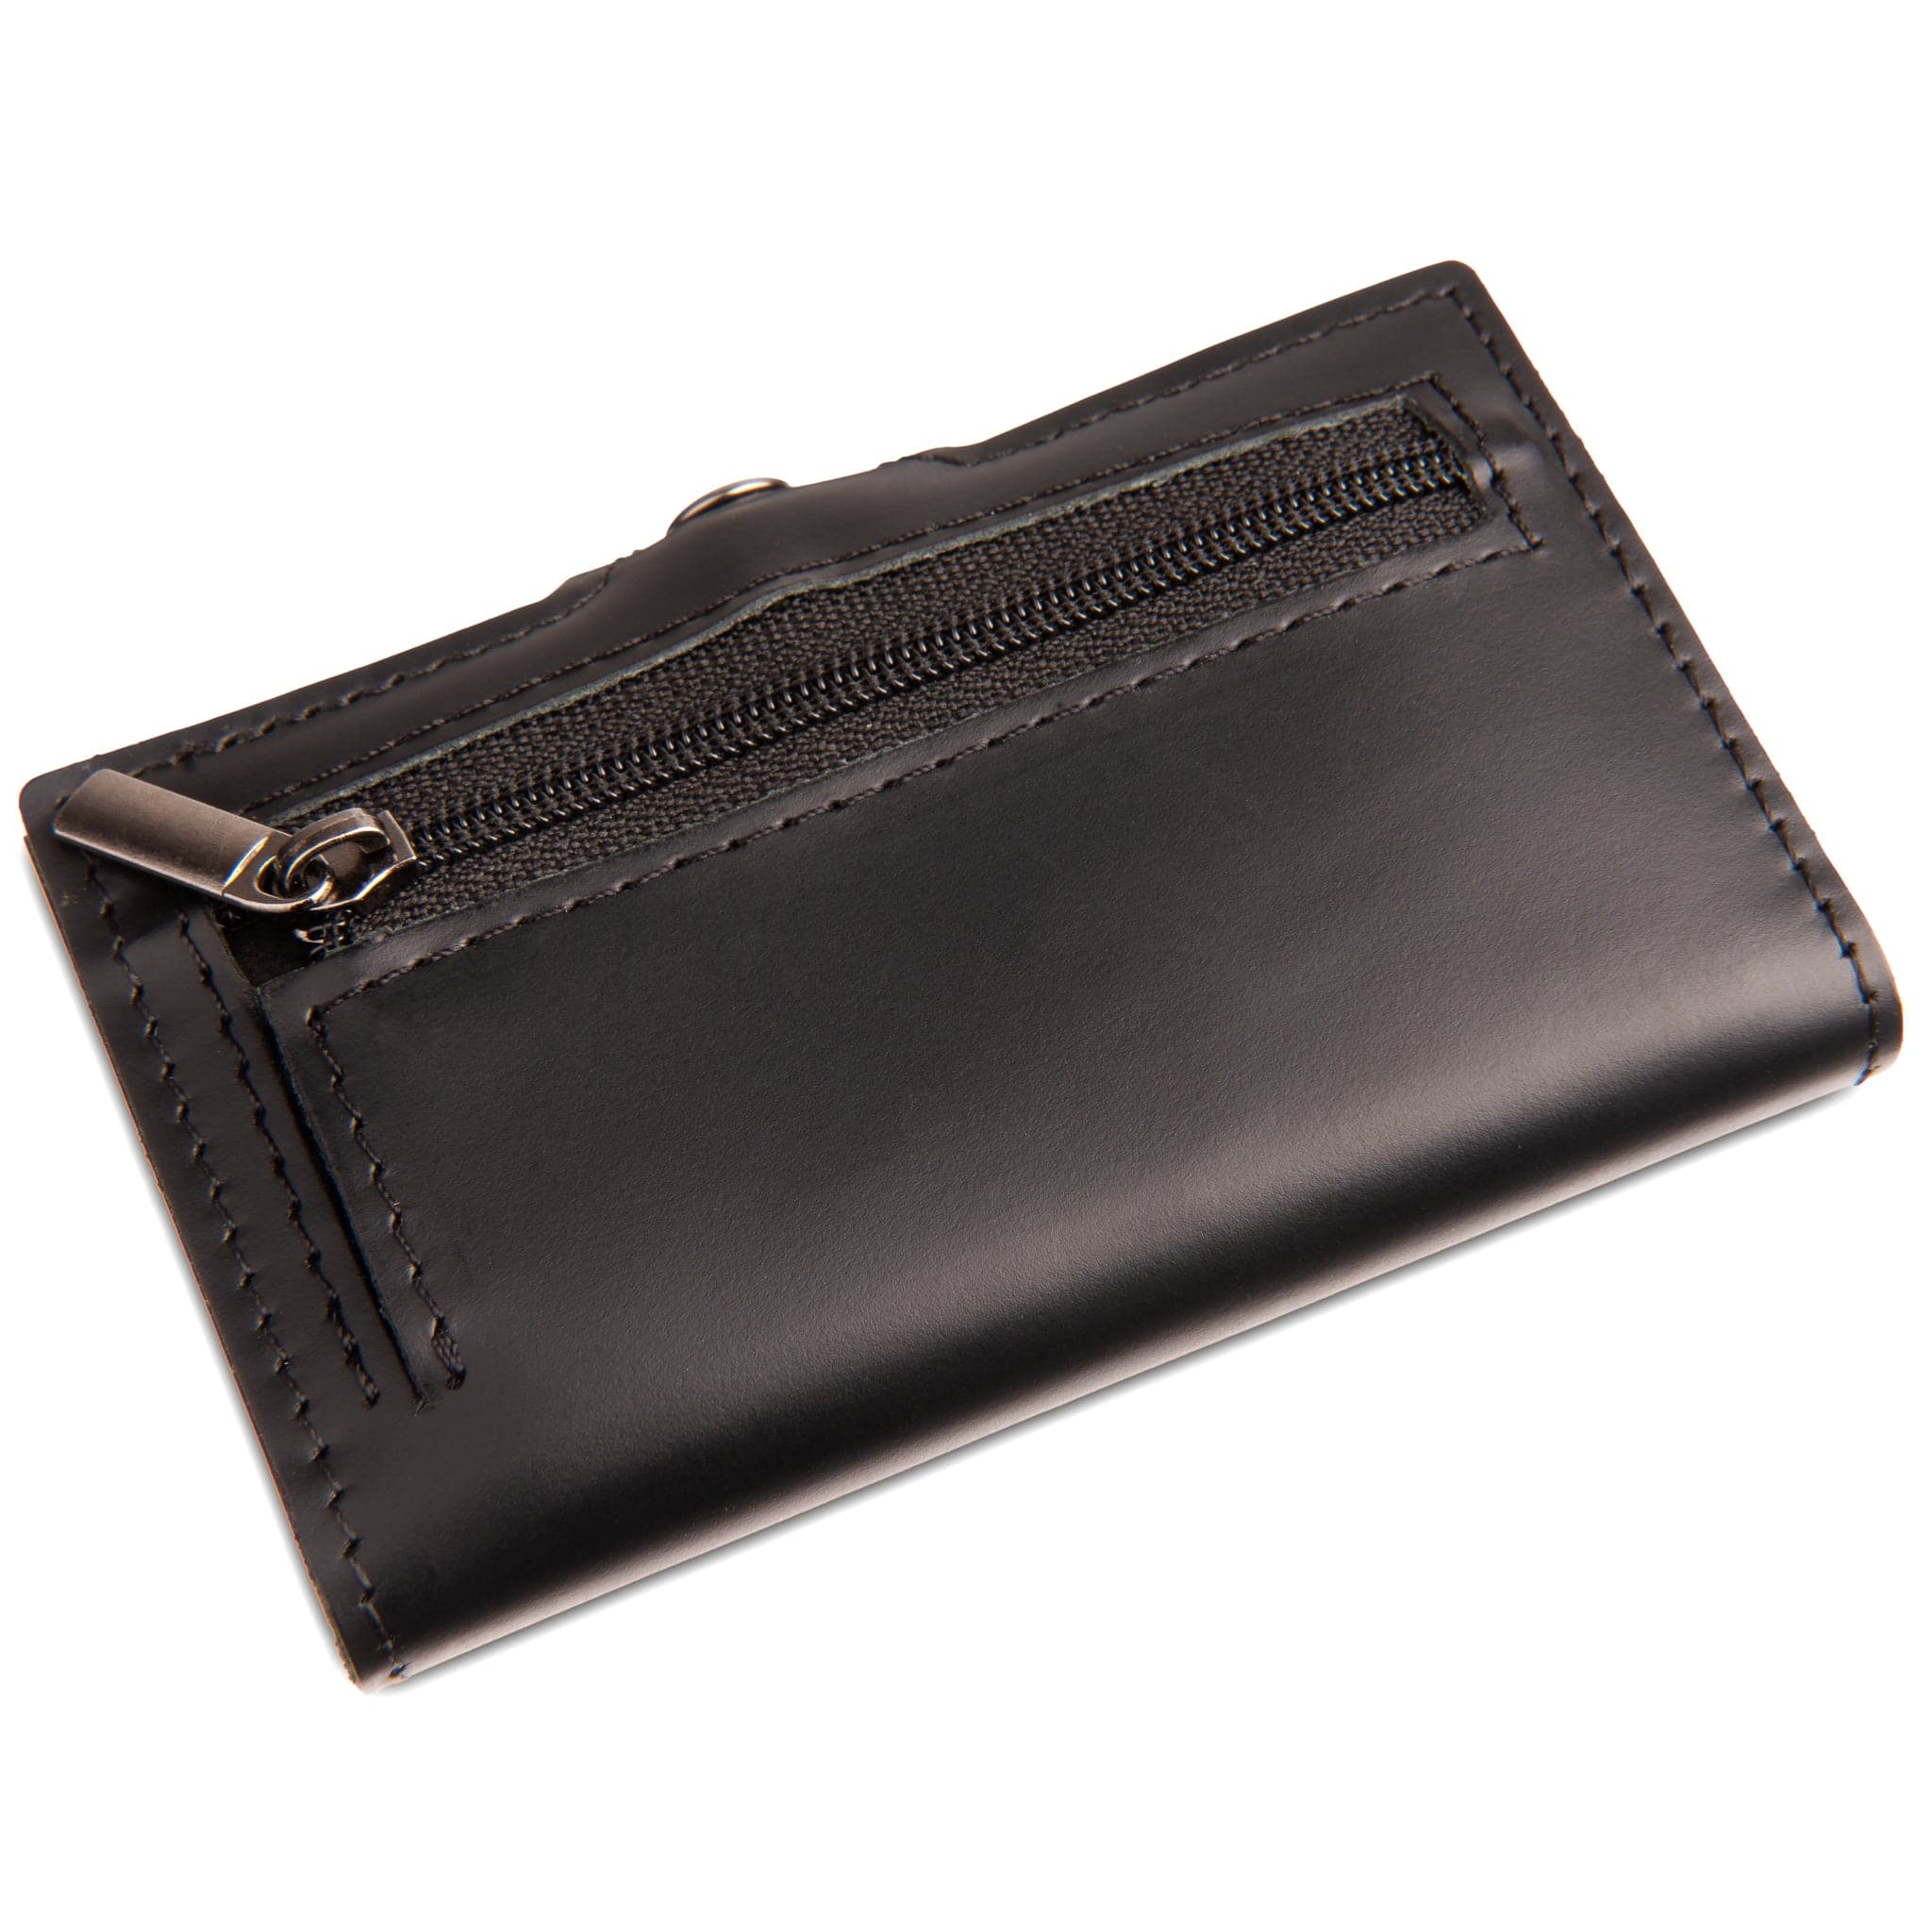 Cardinal Black leather wallet with zipper